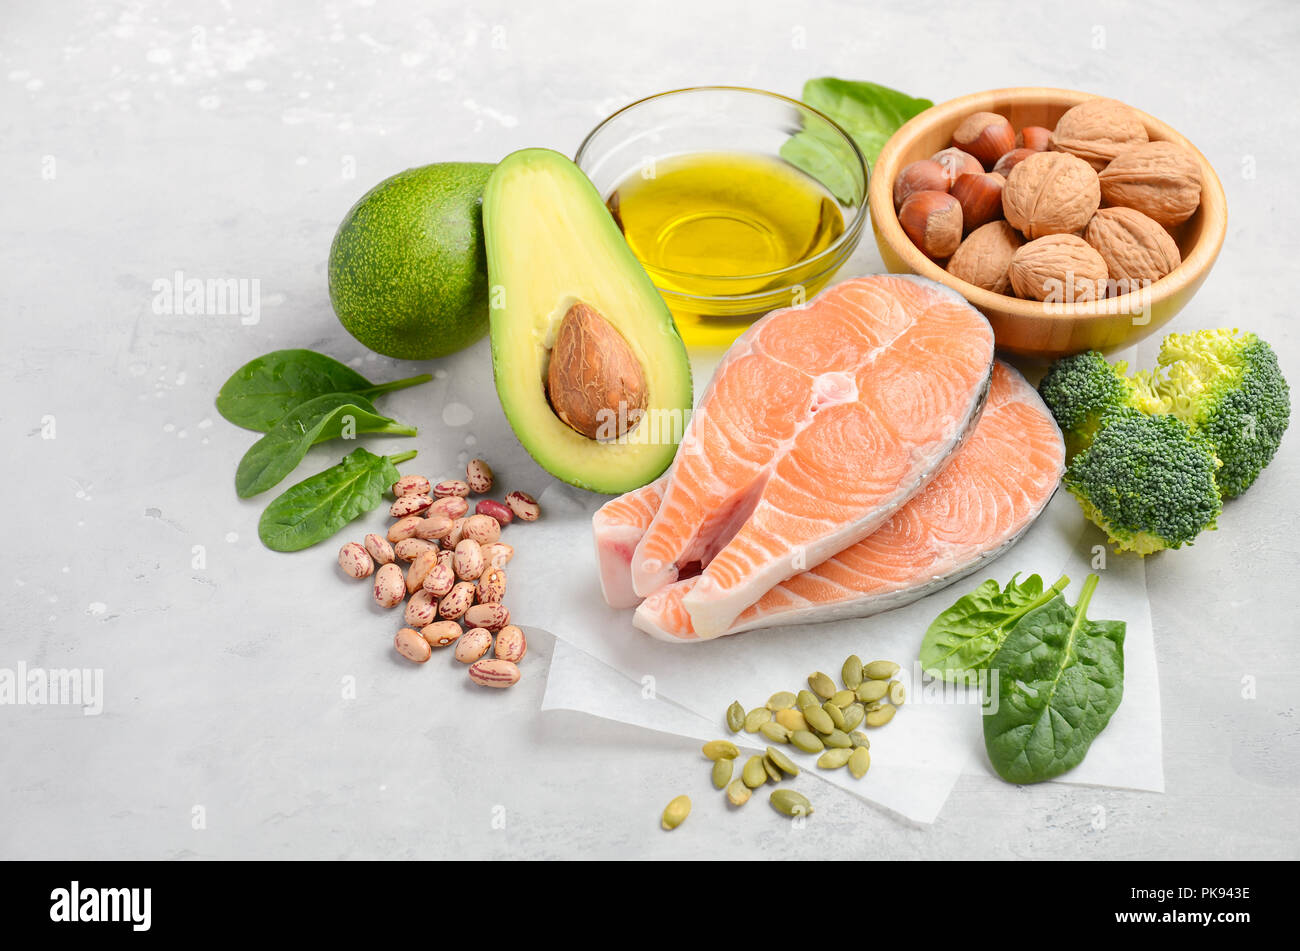 Selection of healthy food for heart, life concept. Stock Photo